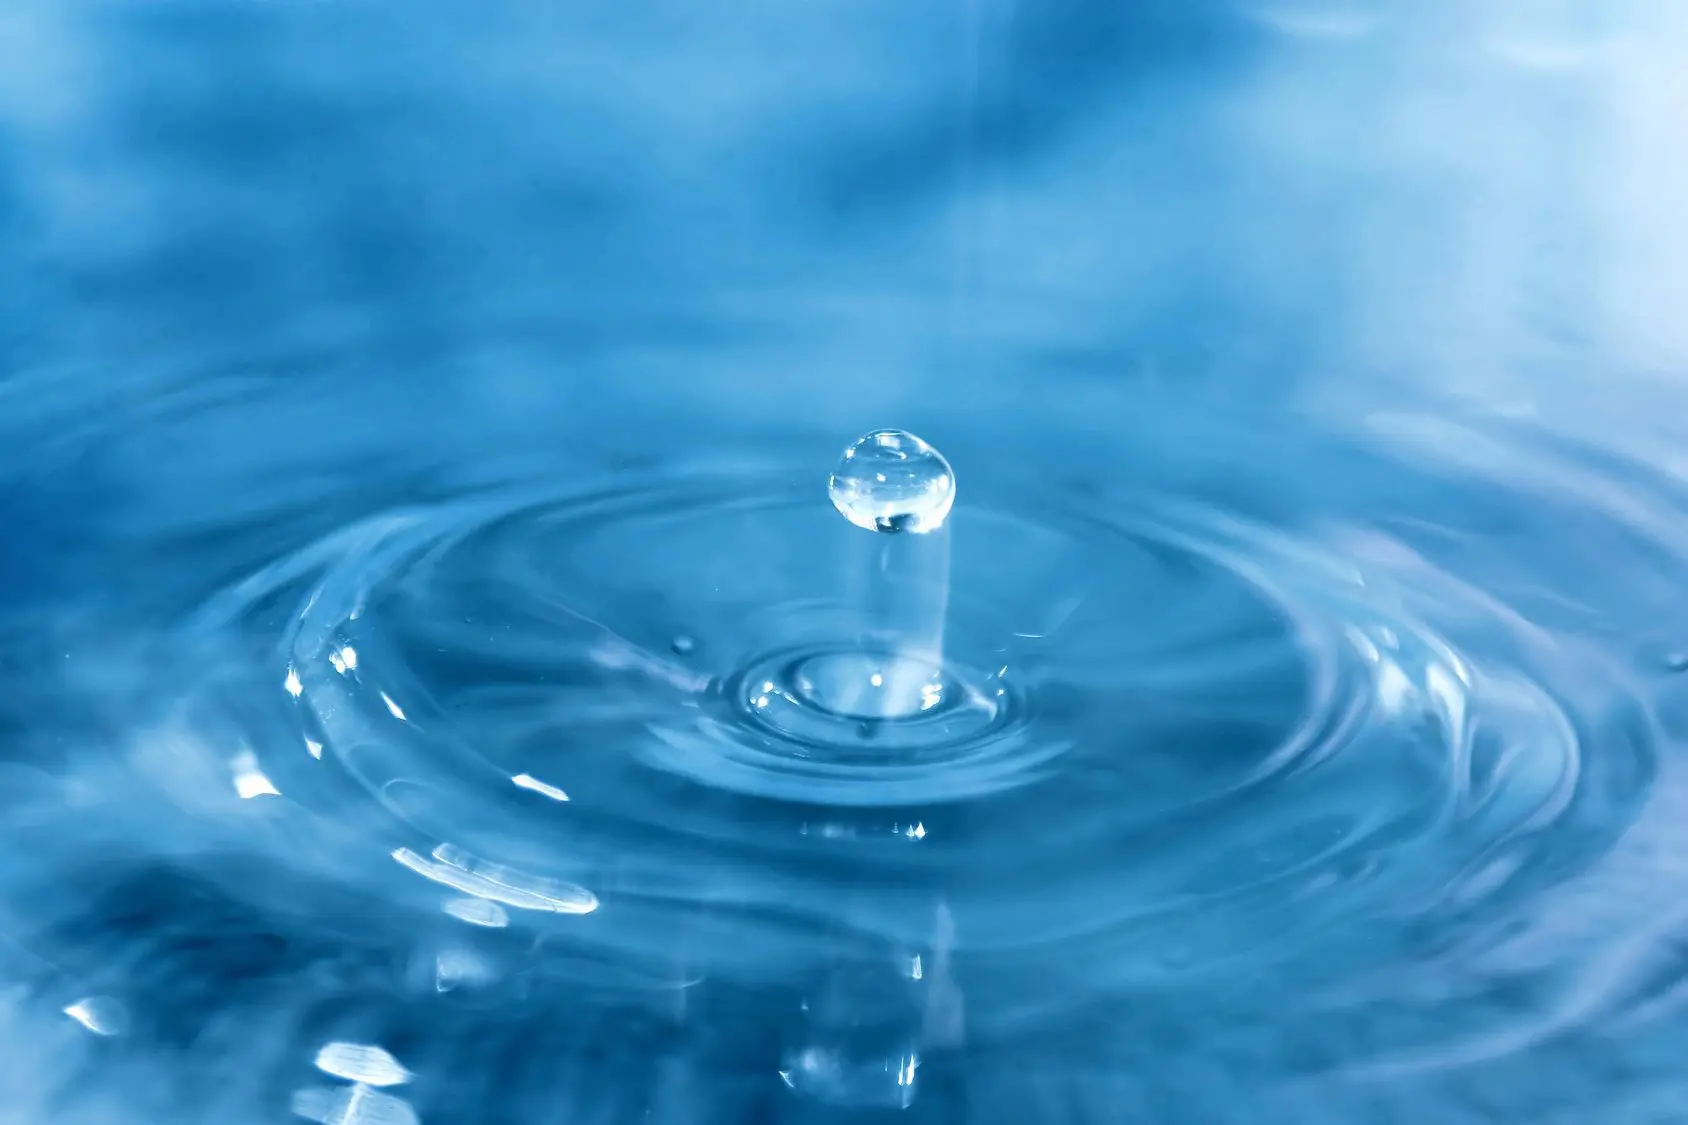 A water drop is shown in the air.